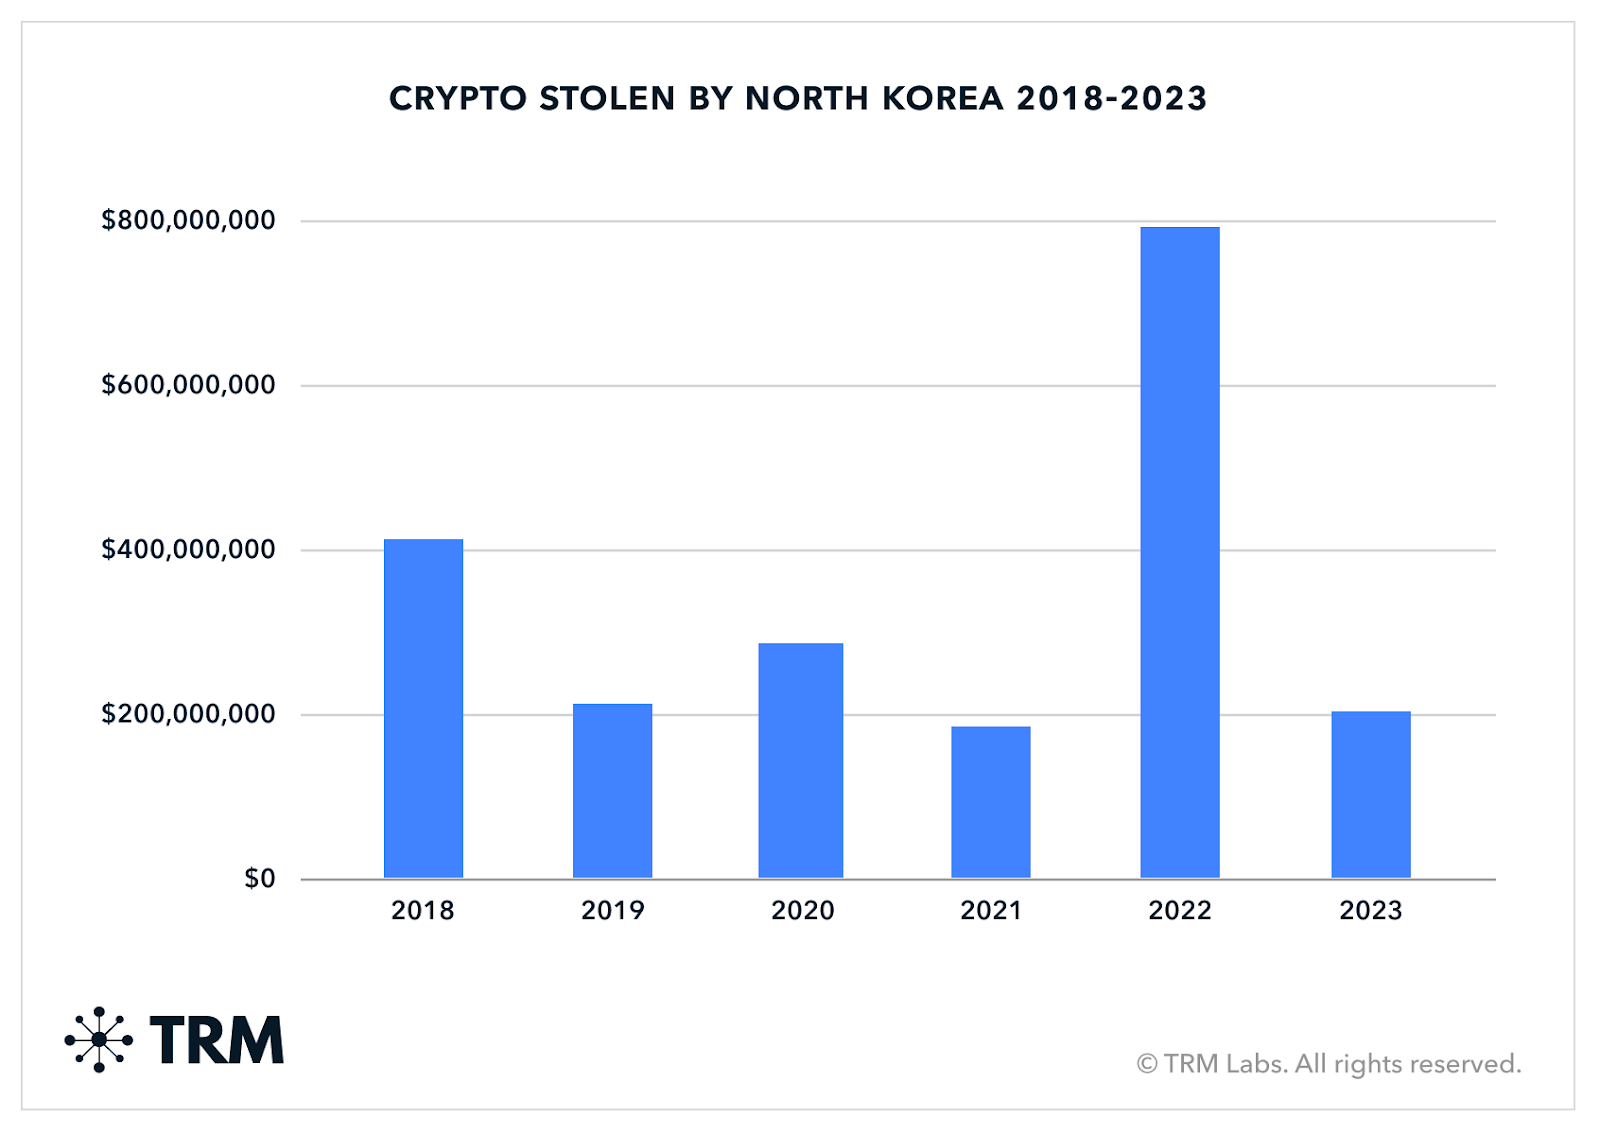 North Korean Hackers Have Looted $2,000,000,000 Worth of Crypto in the Past Five Years: Blockchain Data Firm - The Daily Hodl